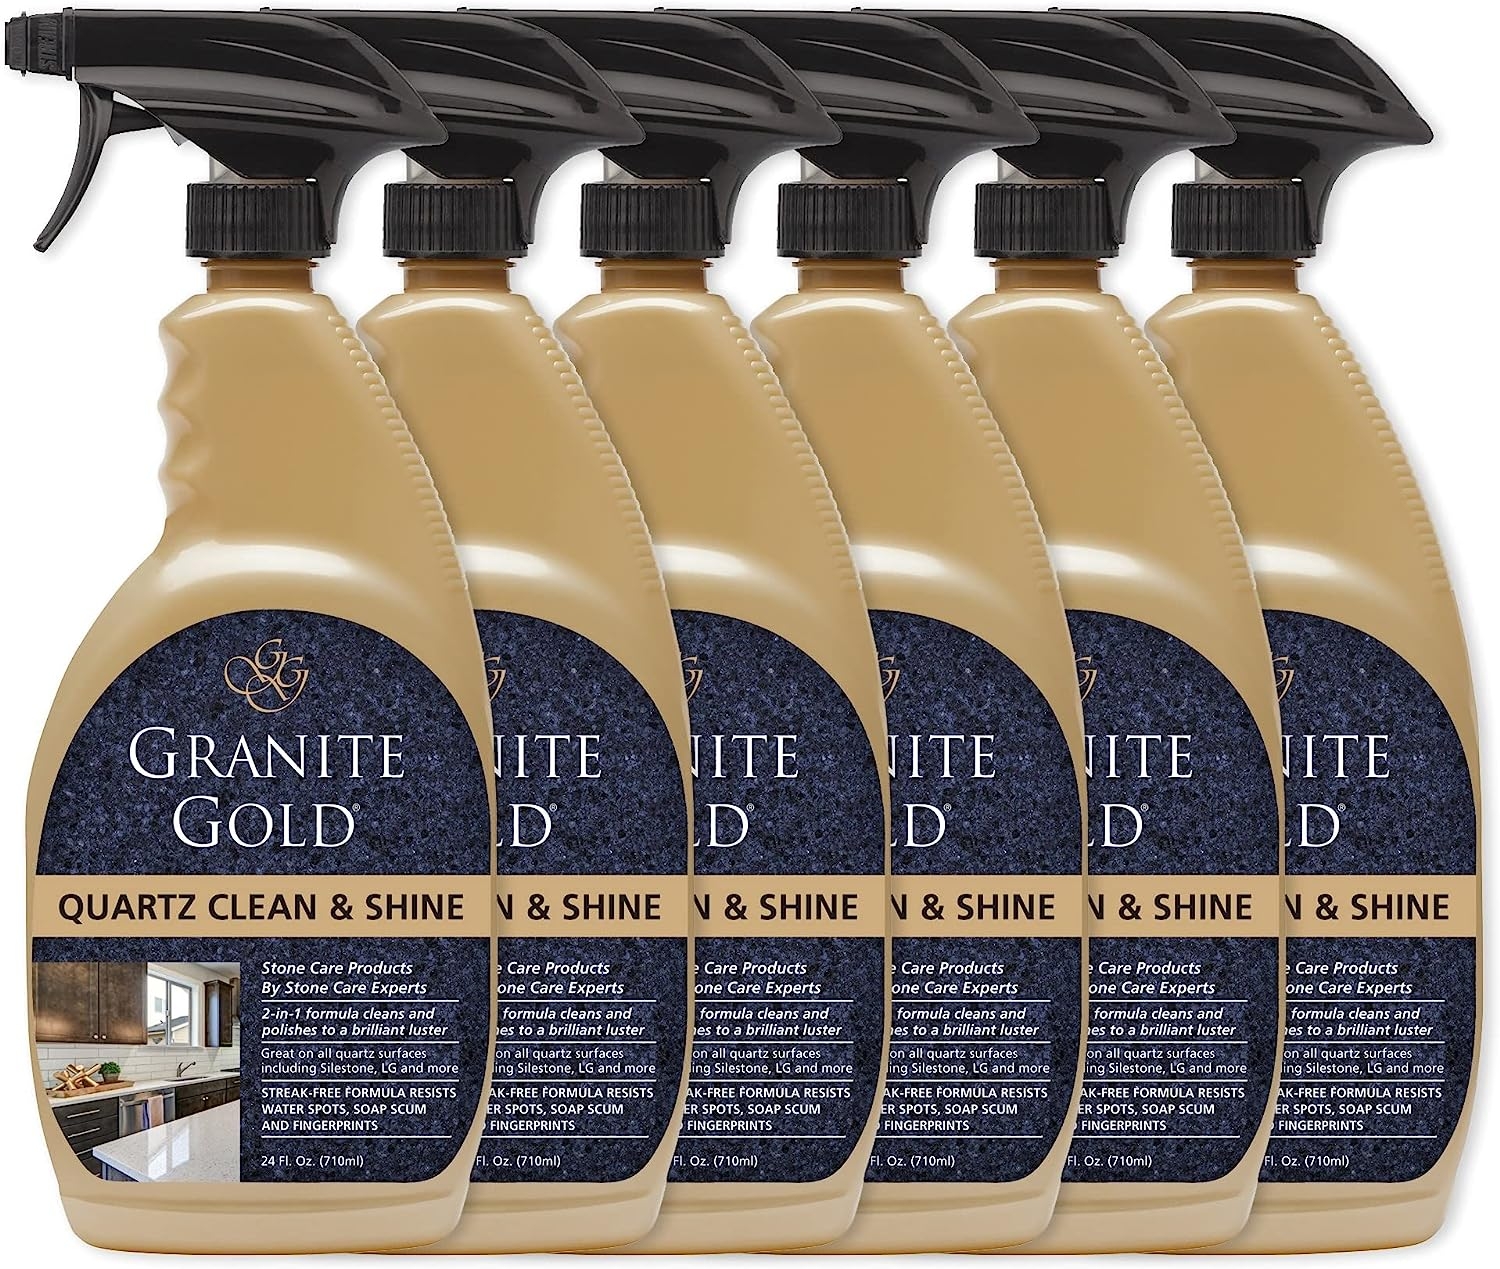 Granite Gold Quartz Clean & Shine Streak-Free Cleaner Deeps Cleans and Polishes All Quartz Surfaces Including Silestone, LG, and